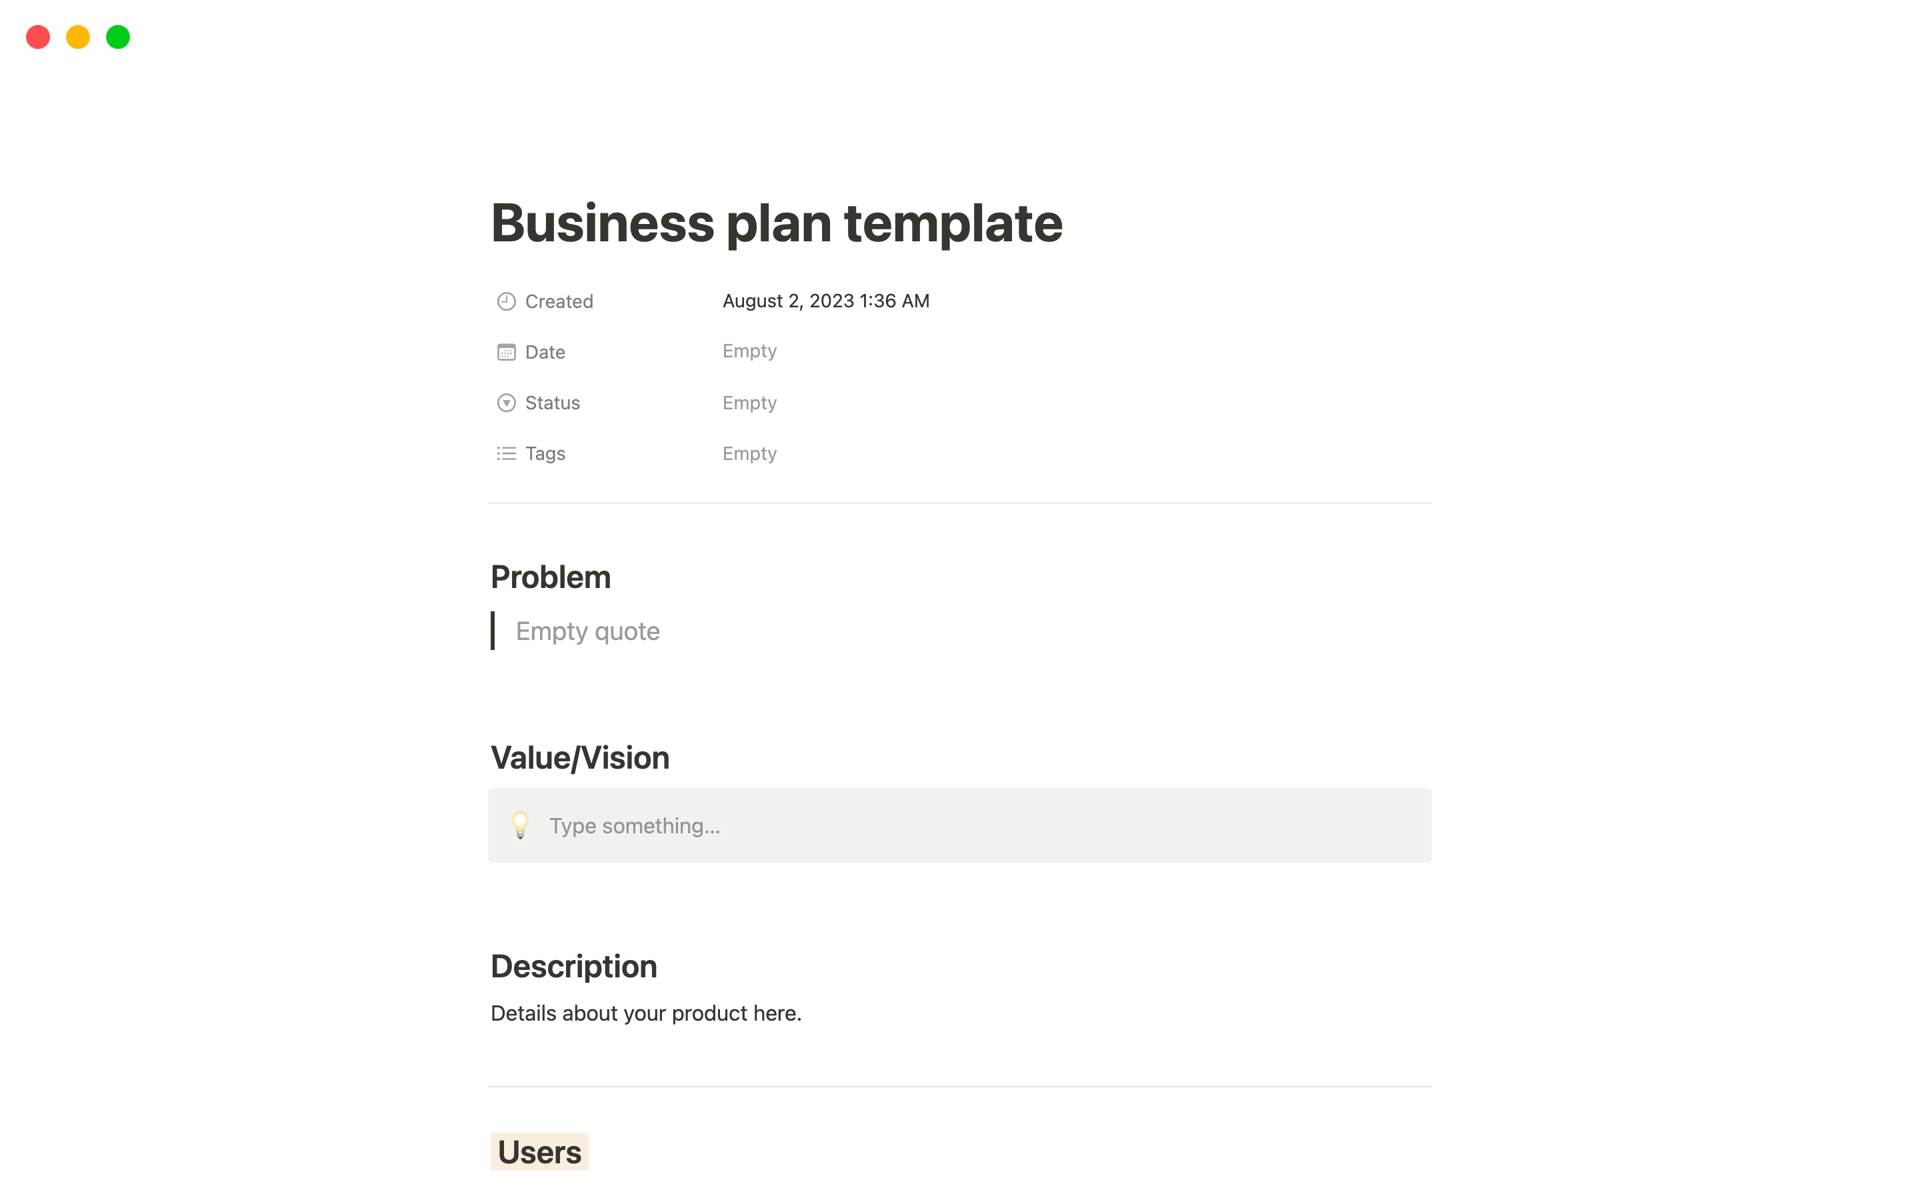 This template gives you the bare minimum things to record when thinking about starting a business. Its sections also forces you to think what areas you need to brainstorm to cover more ground work.